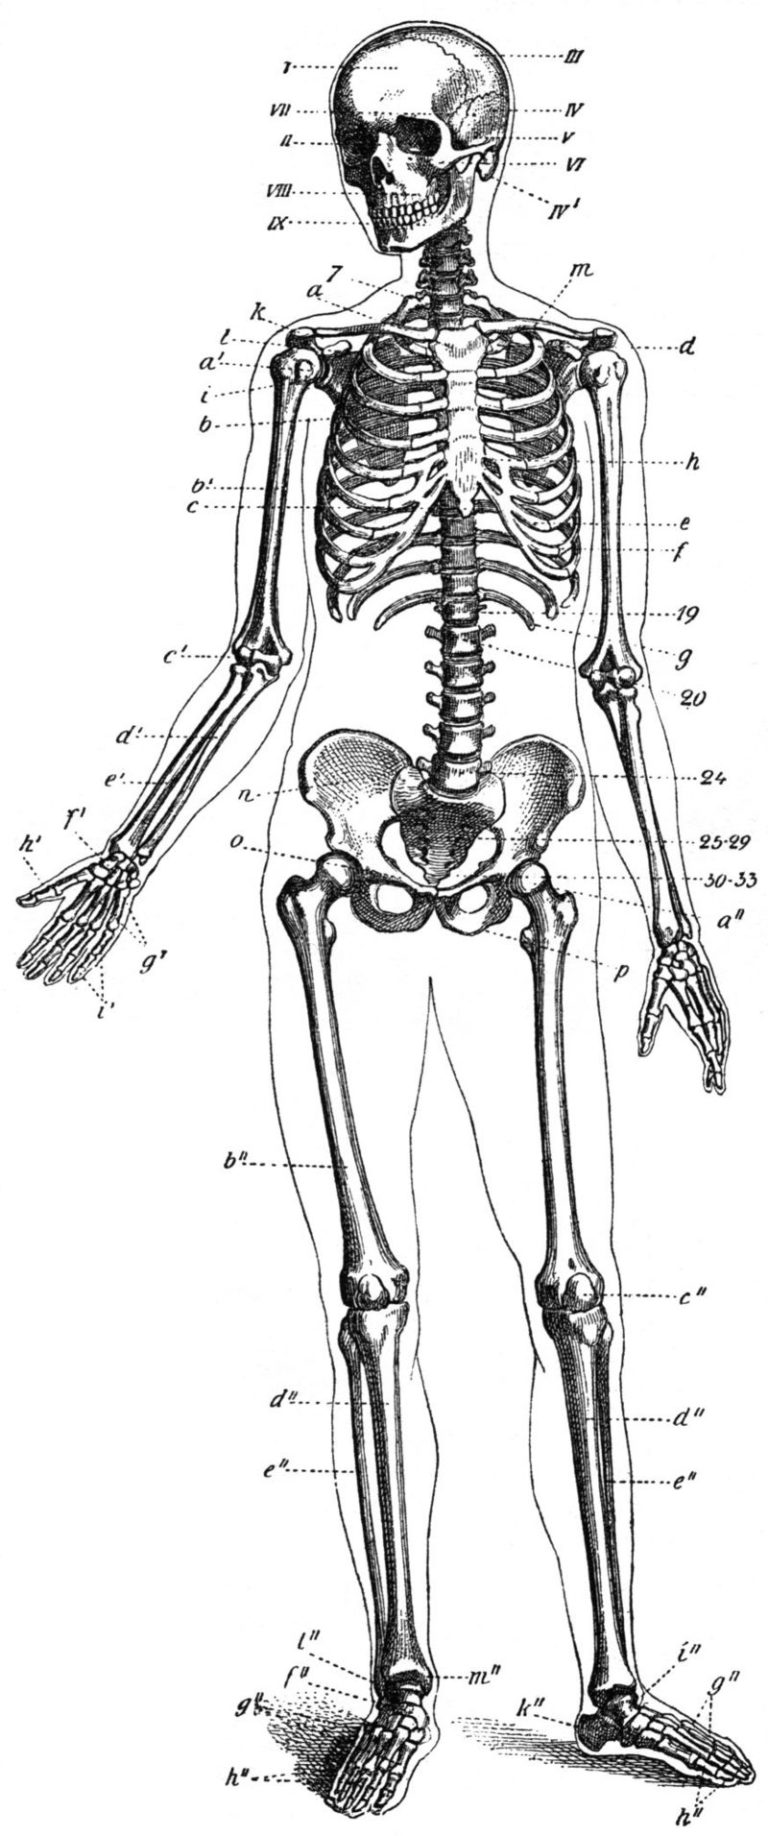 All of the Body's Joints are Reciprocal